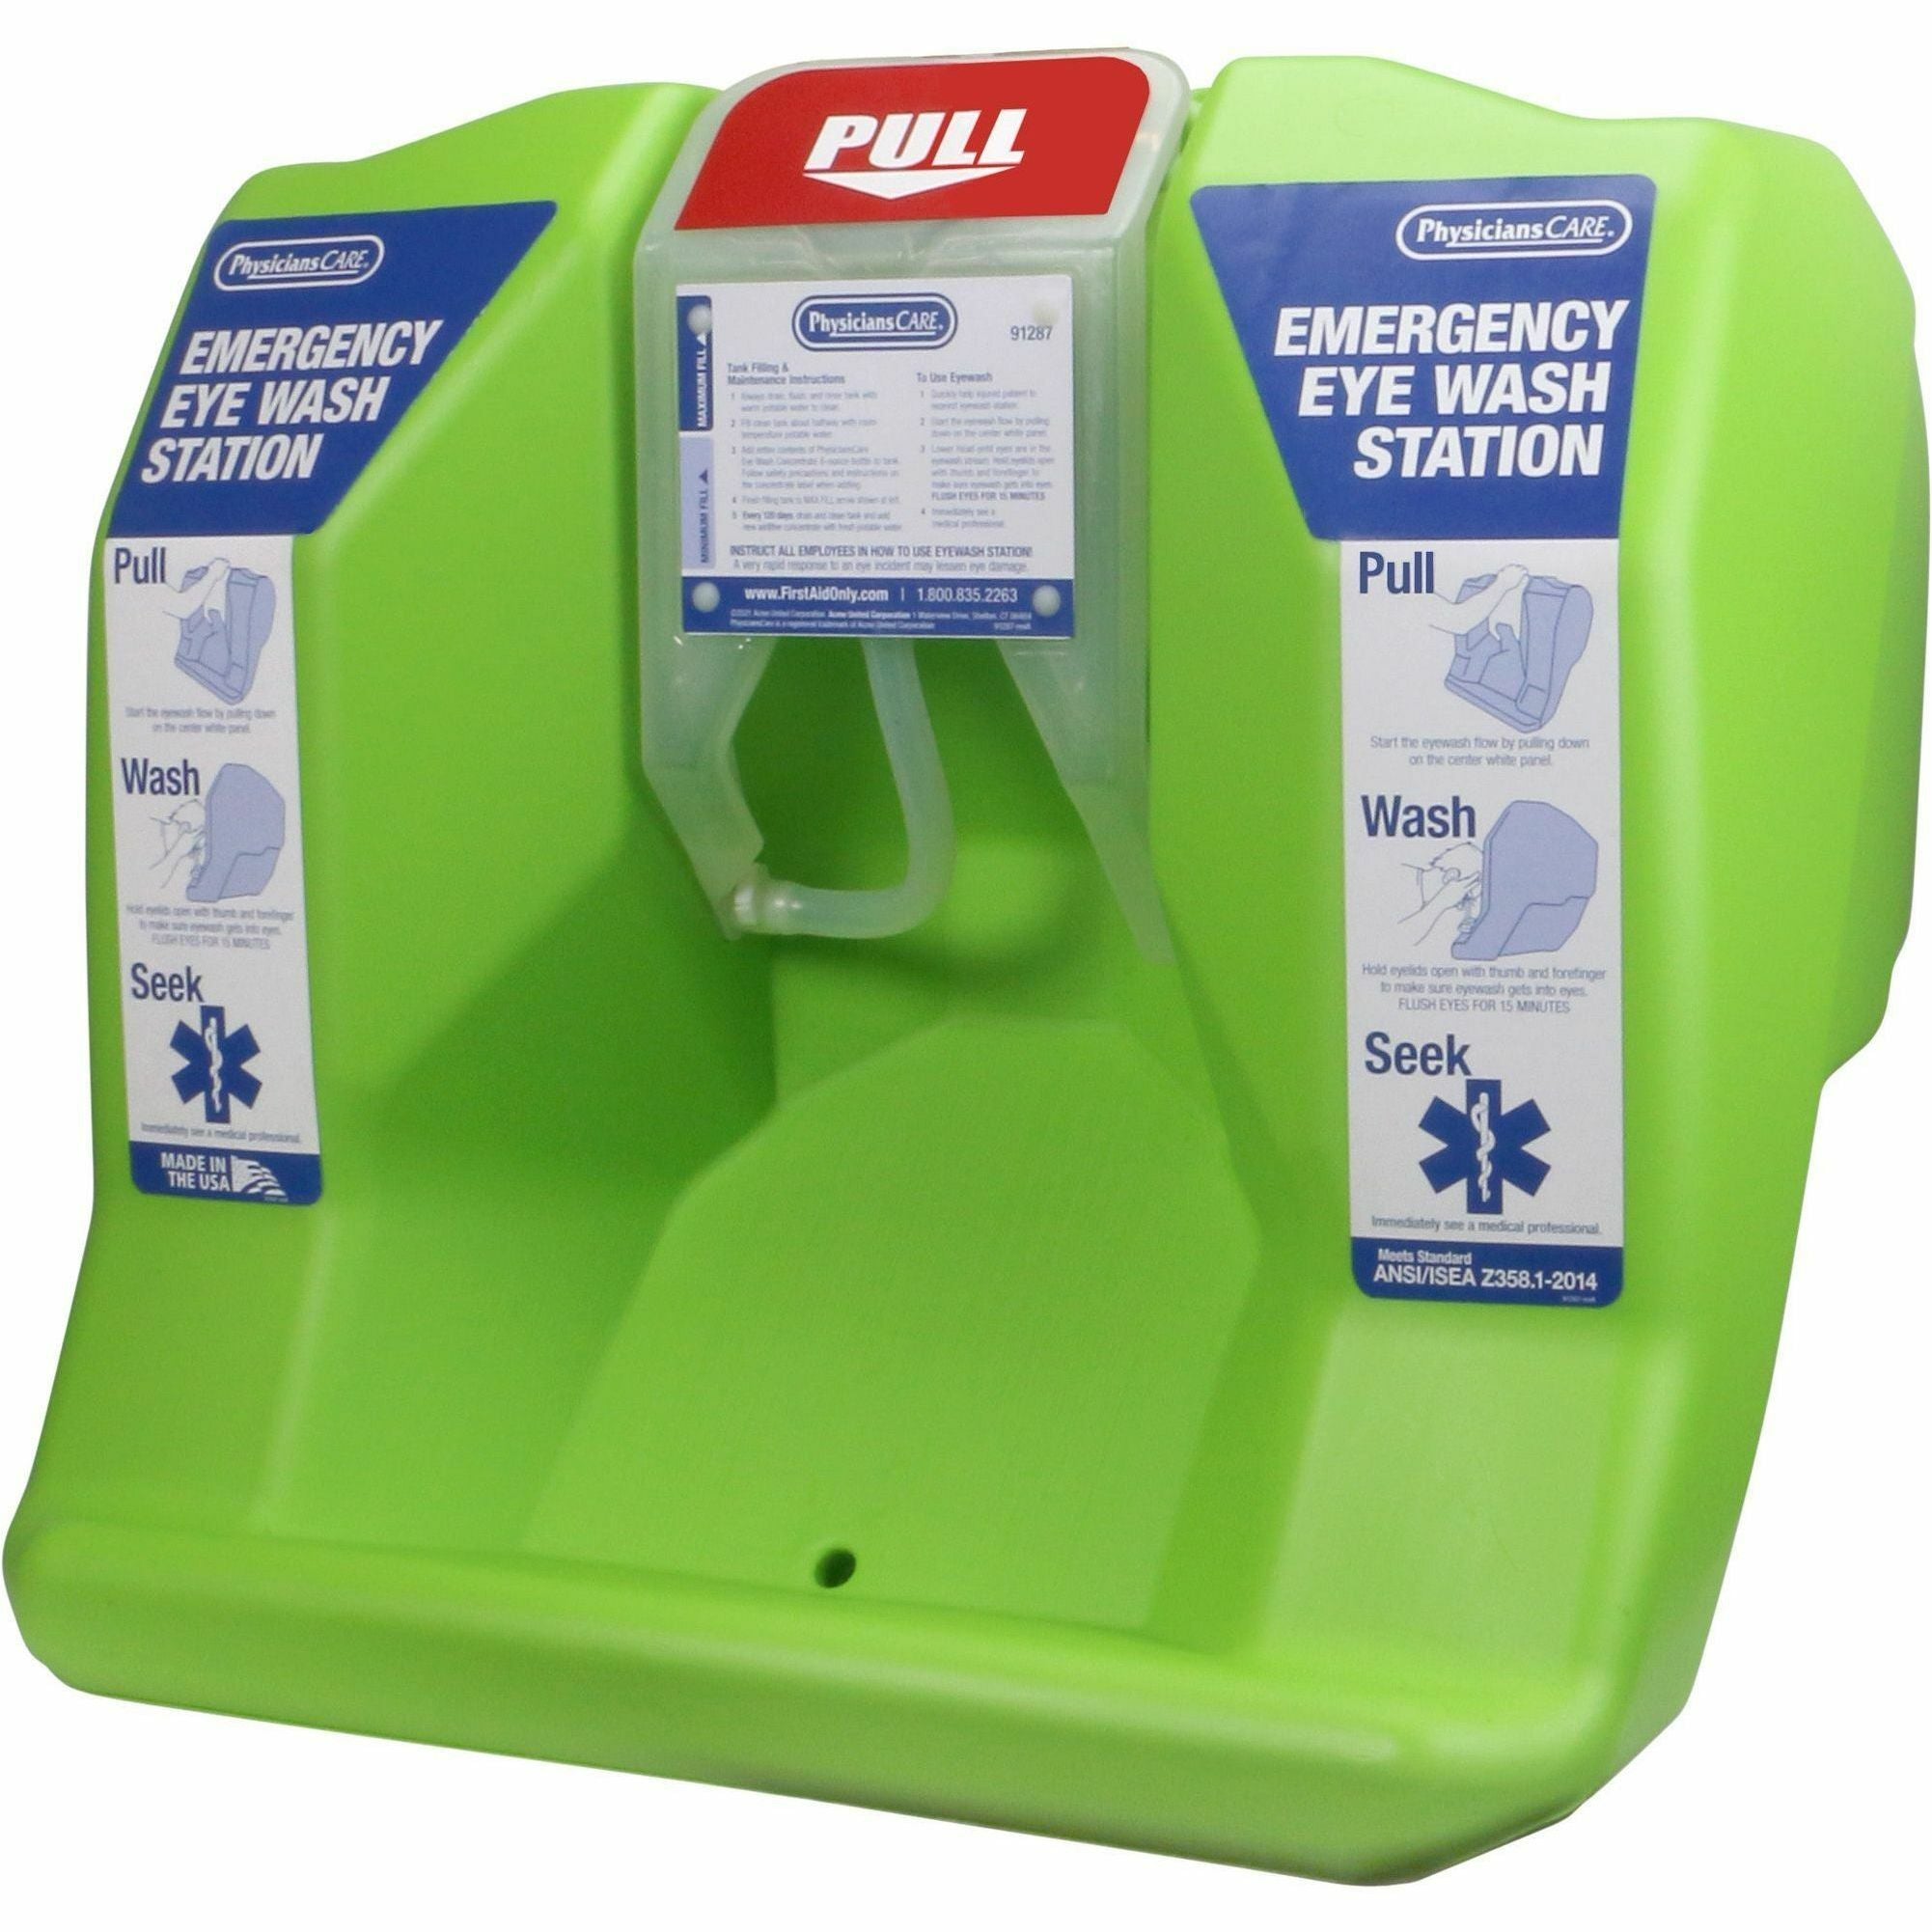 physicianscare-eyewash-station-16-gal-025-hour-clear-bright-green_fao91288 - 3